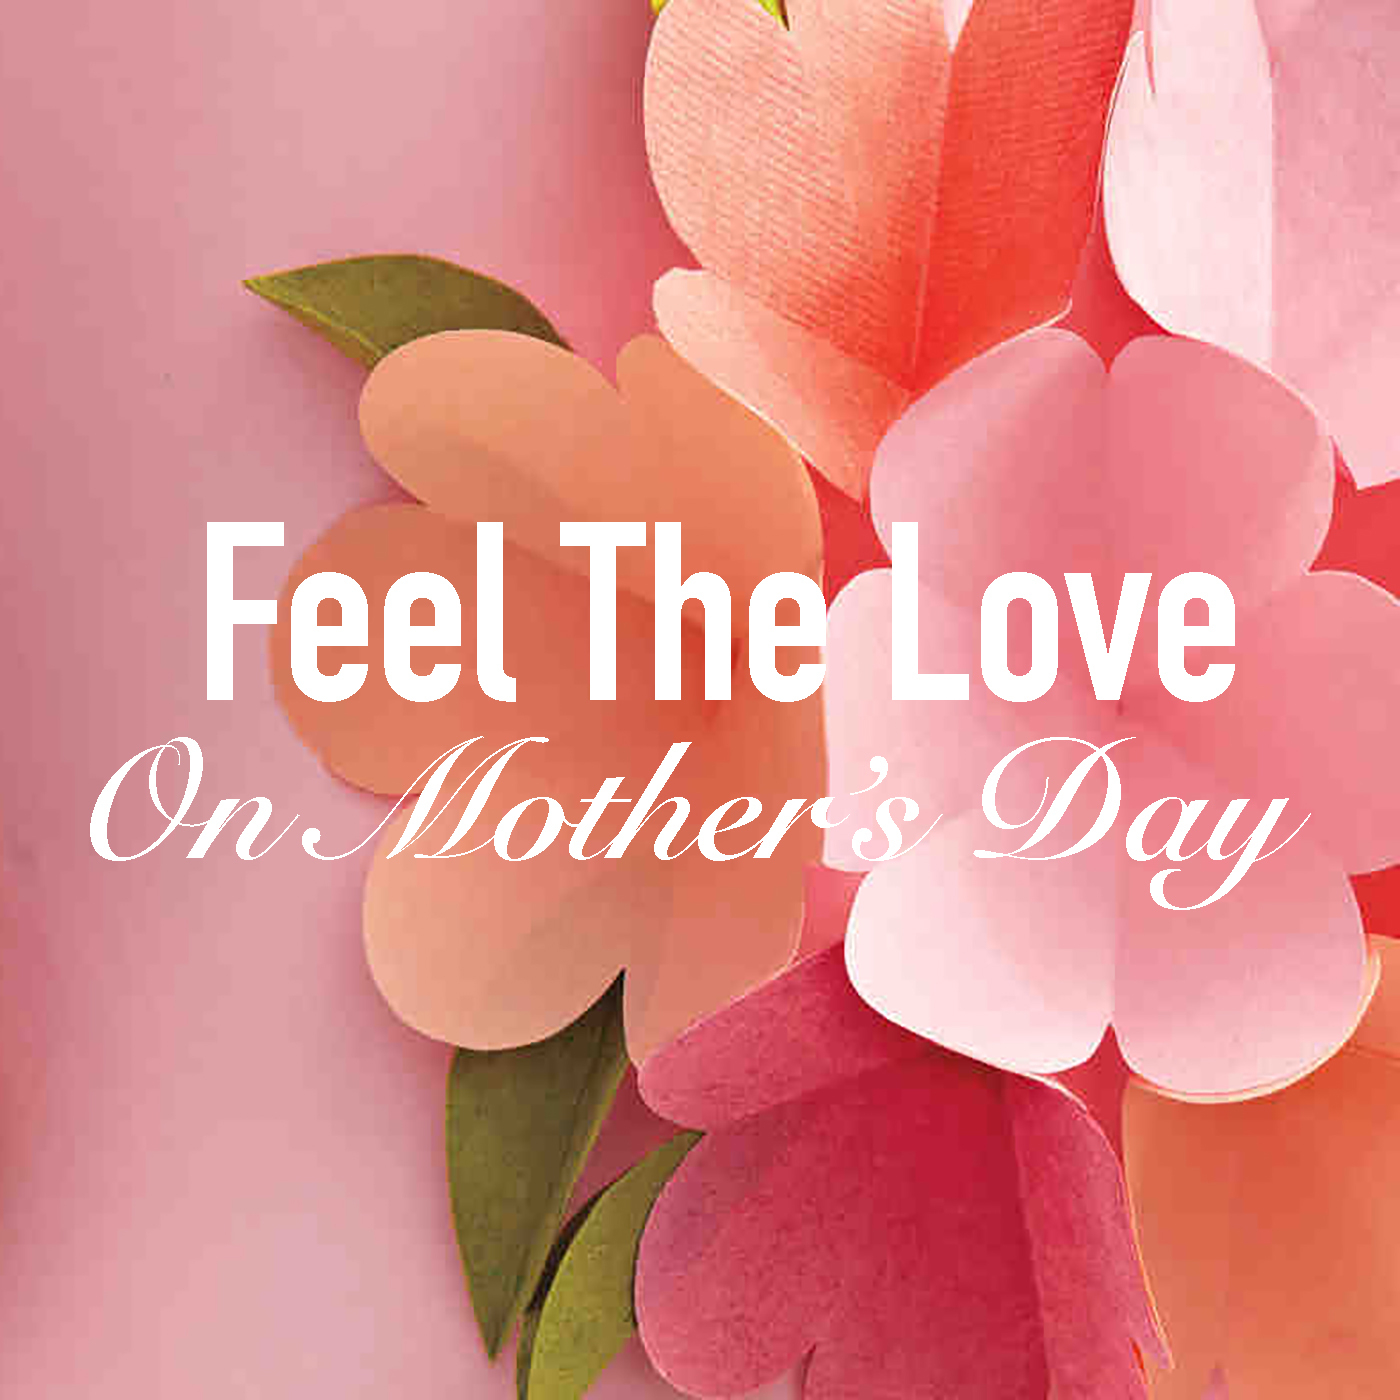 Feel The Love On Mother's Day